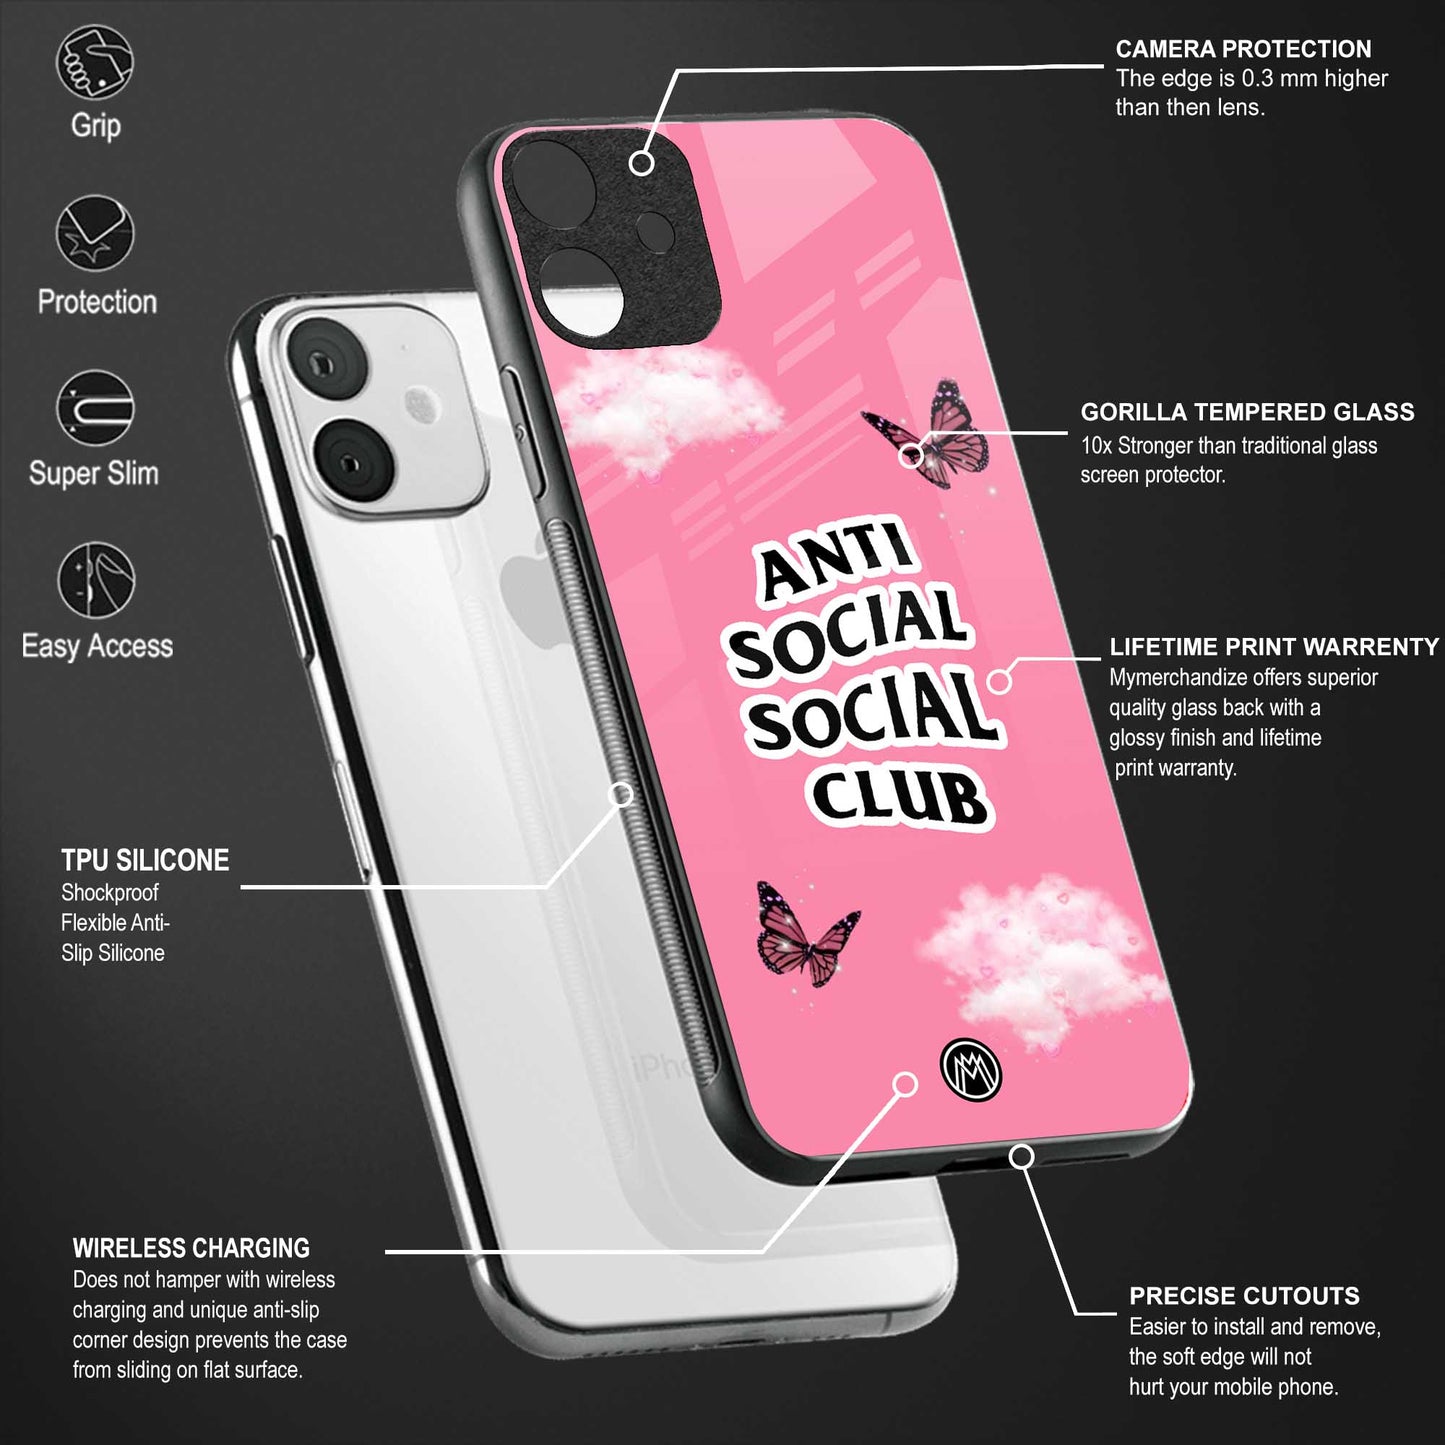 anti social social club pink edition back phone cover | glass case for vivo y35 4g